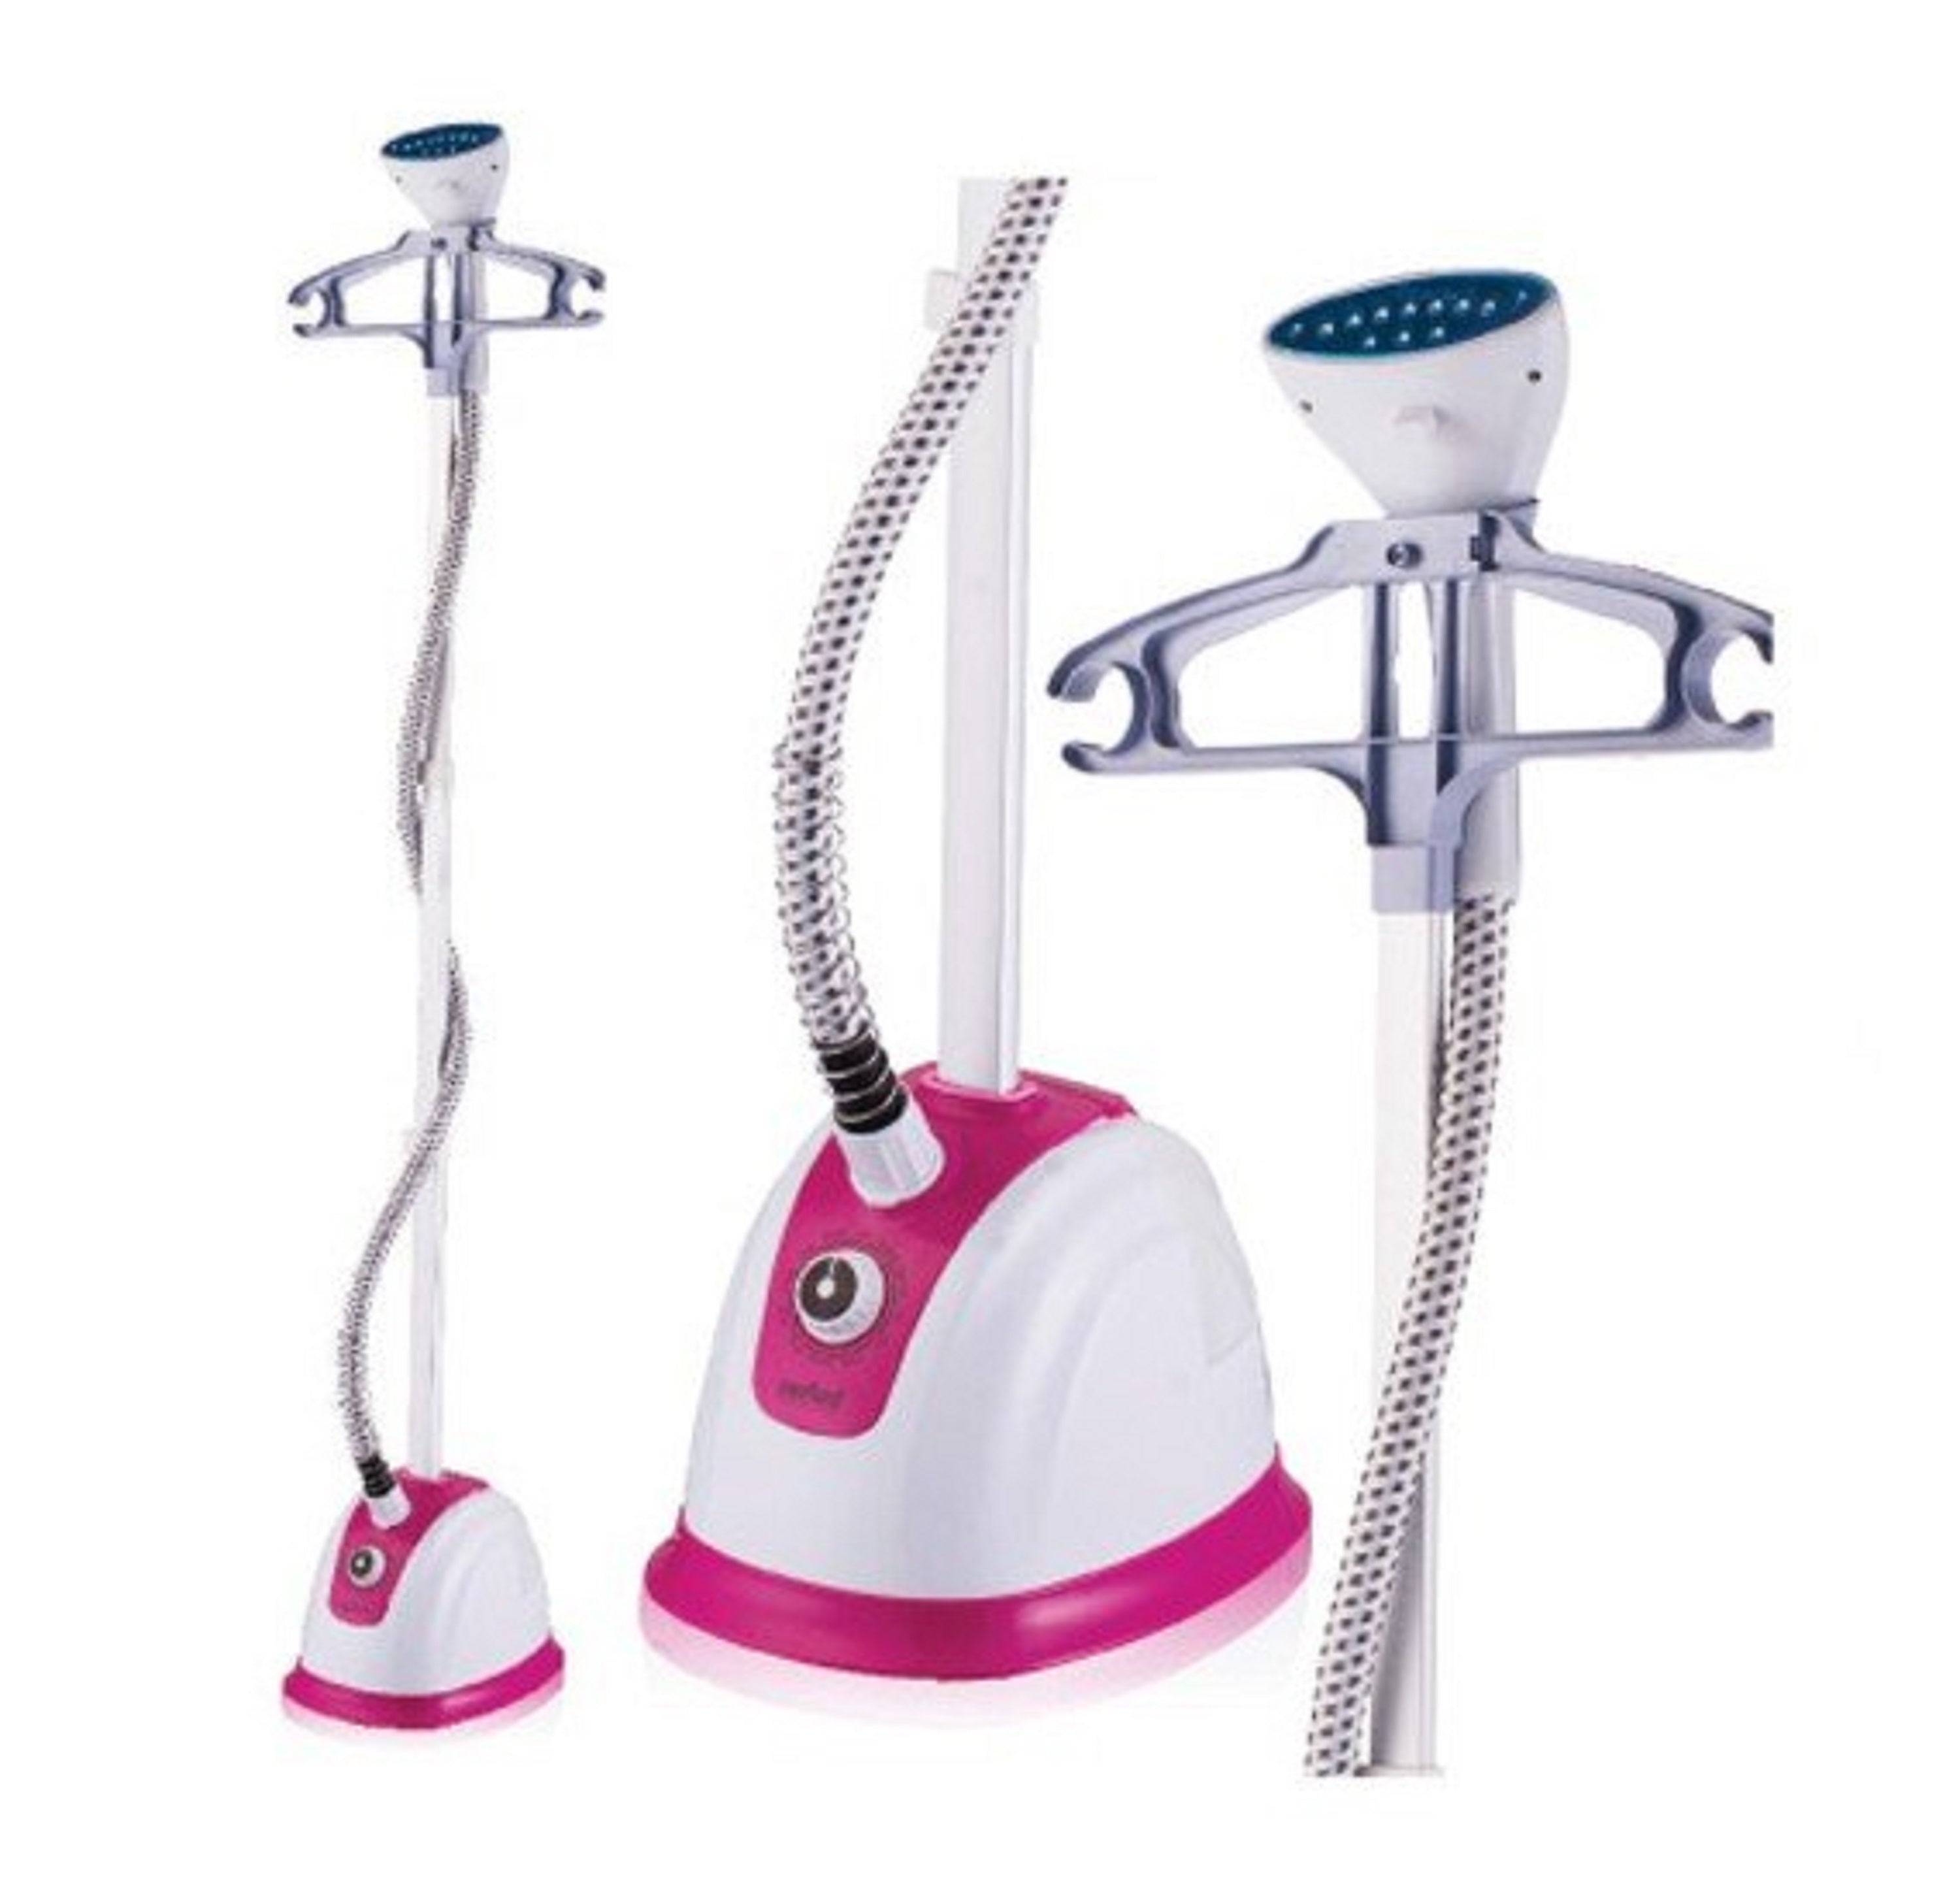 Sanford Garment Steamer 1800W - SF2910GS BS | reliable performance | lightweight | variable steam settings | safety features | stylish | even heat distribution | Halabh.com